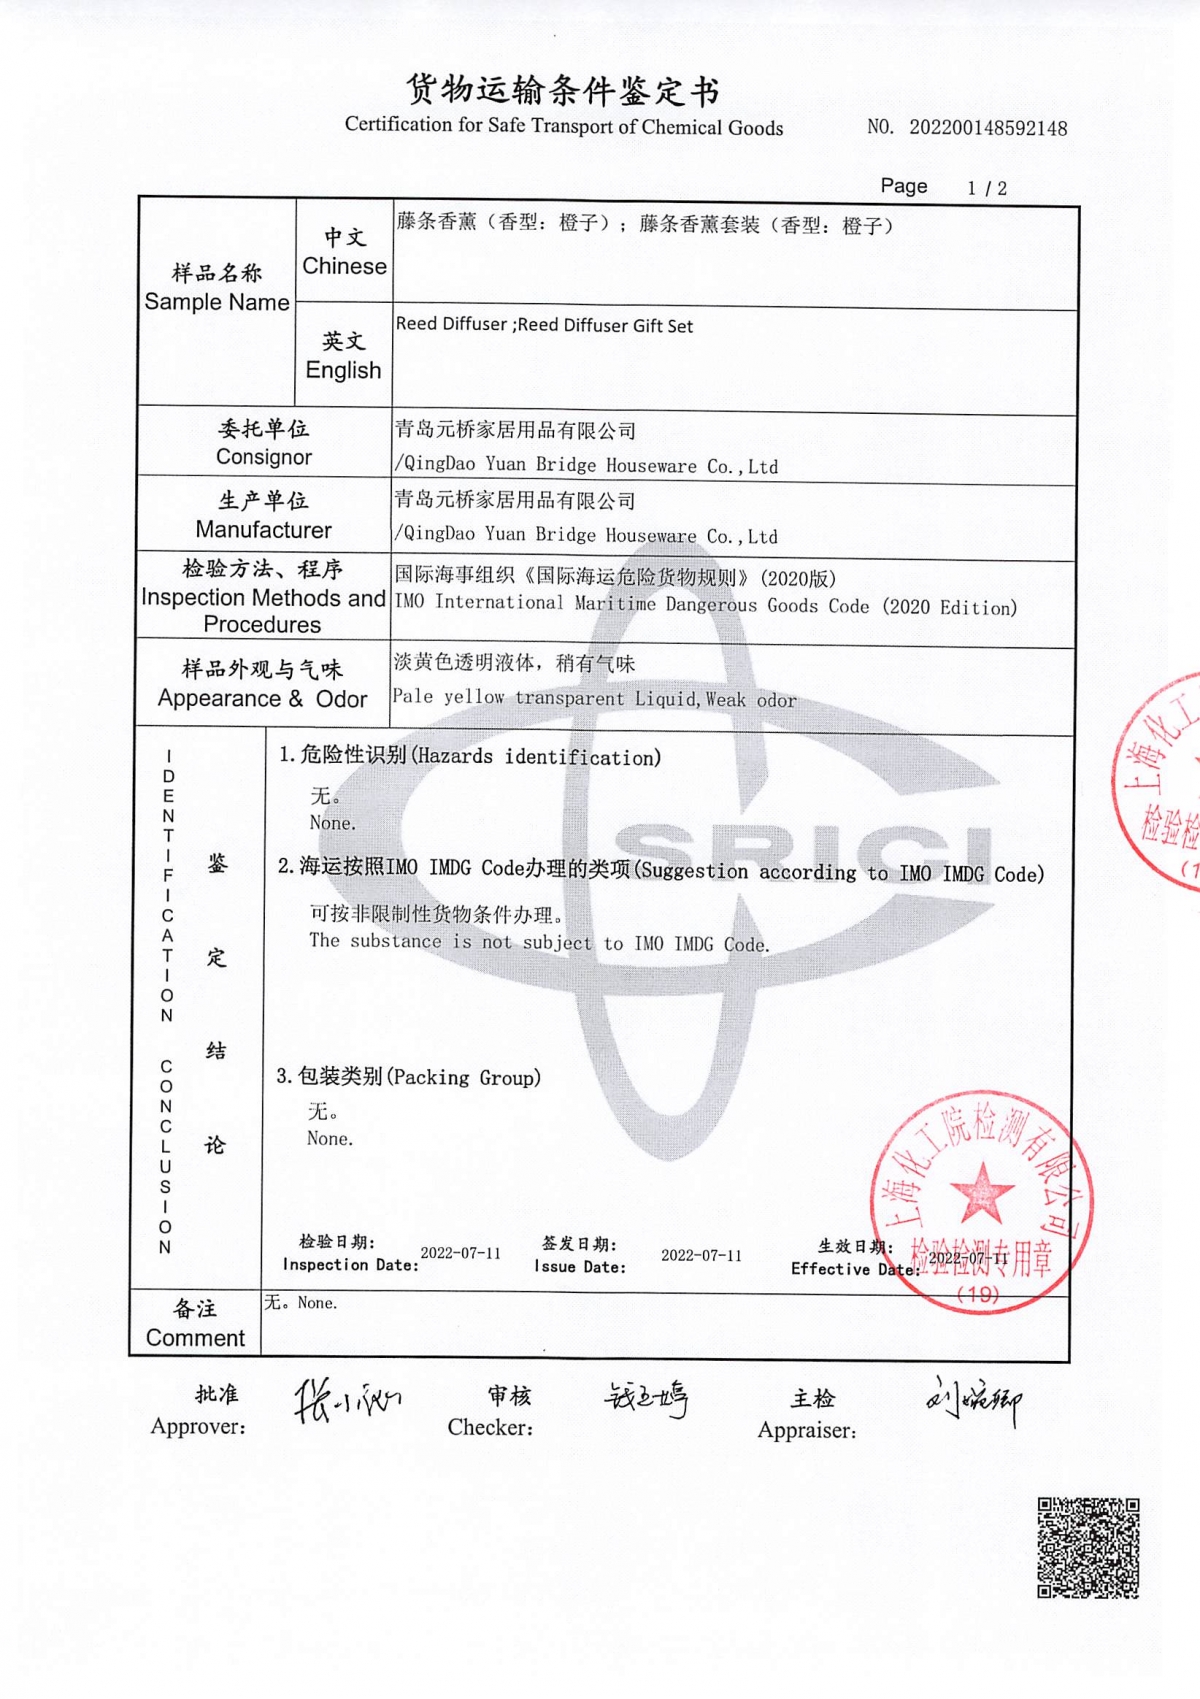 Reed Diffuser ‘s Certification for Safe Transport of Chemical Goods ,China Factory-HOWCANDLE-Candles,Scented Candles,Aromatherapy Candles,Soy Candles,Vegan Candles,Jar Candles,Pillar Candles,Candle Gift Sets,Essential Oils,Reed Diffuser,Candle Holder,